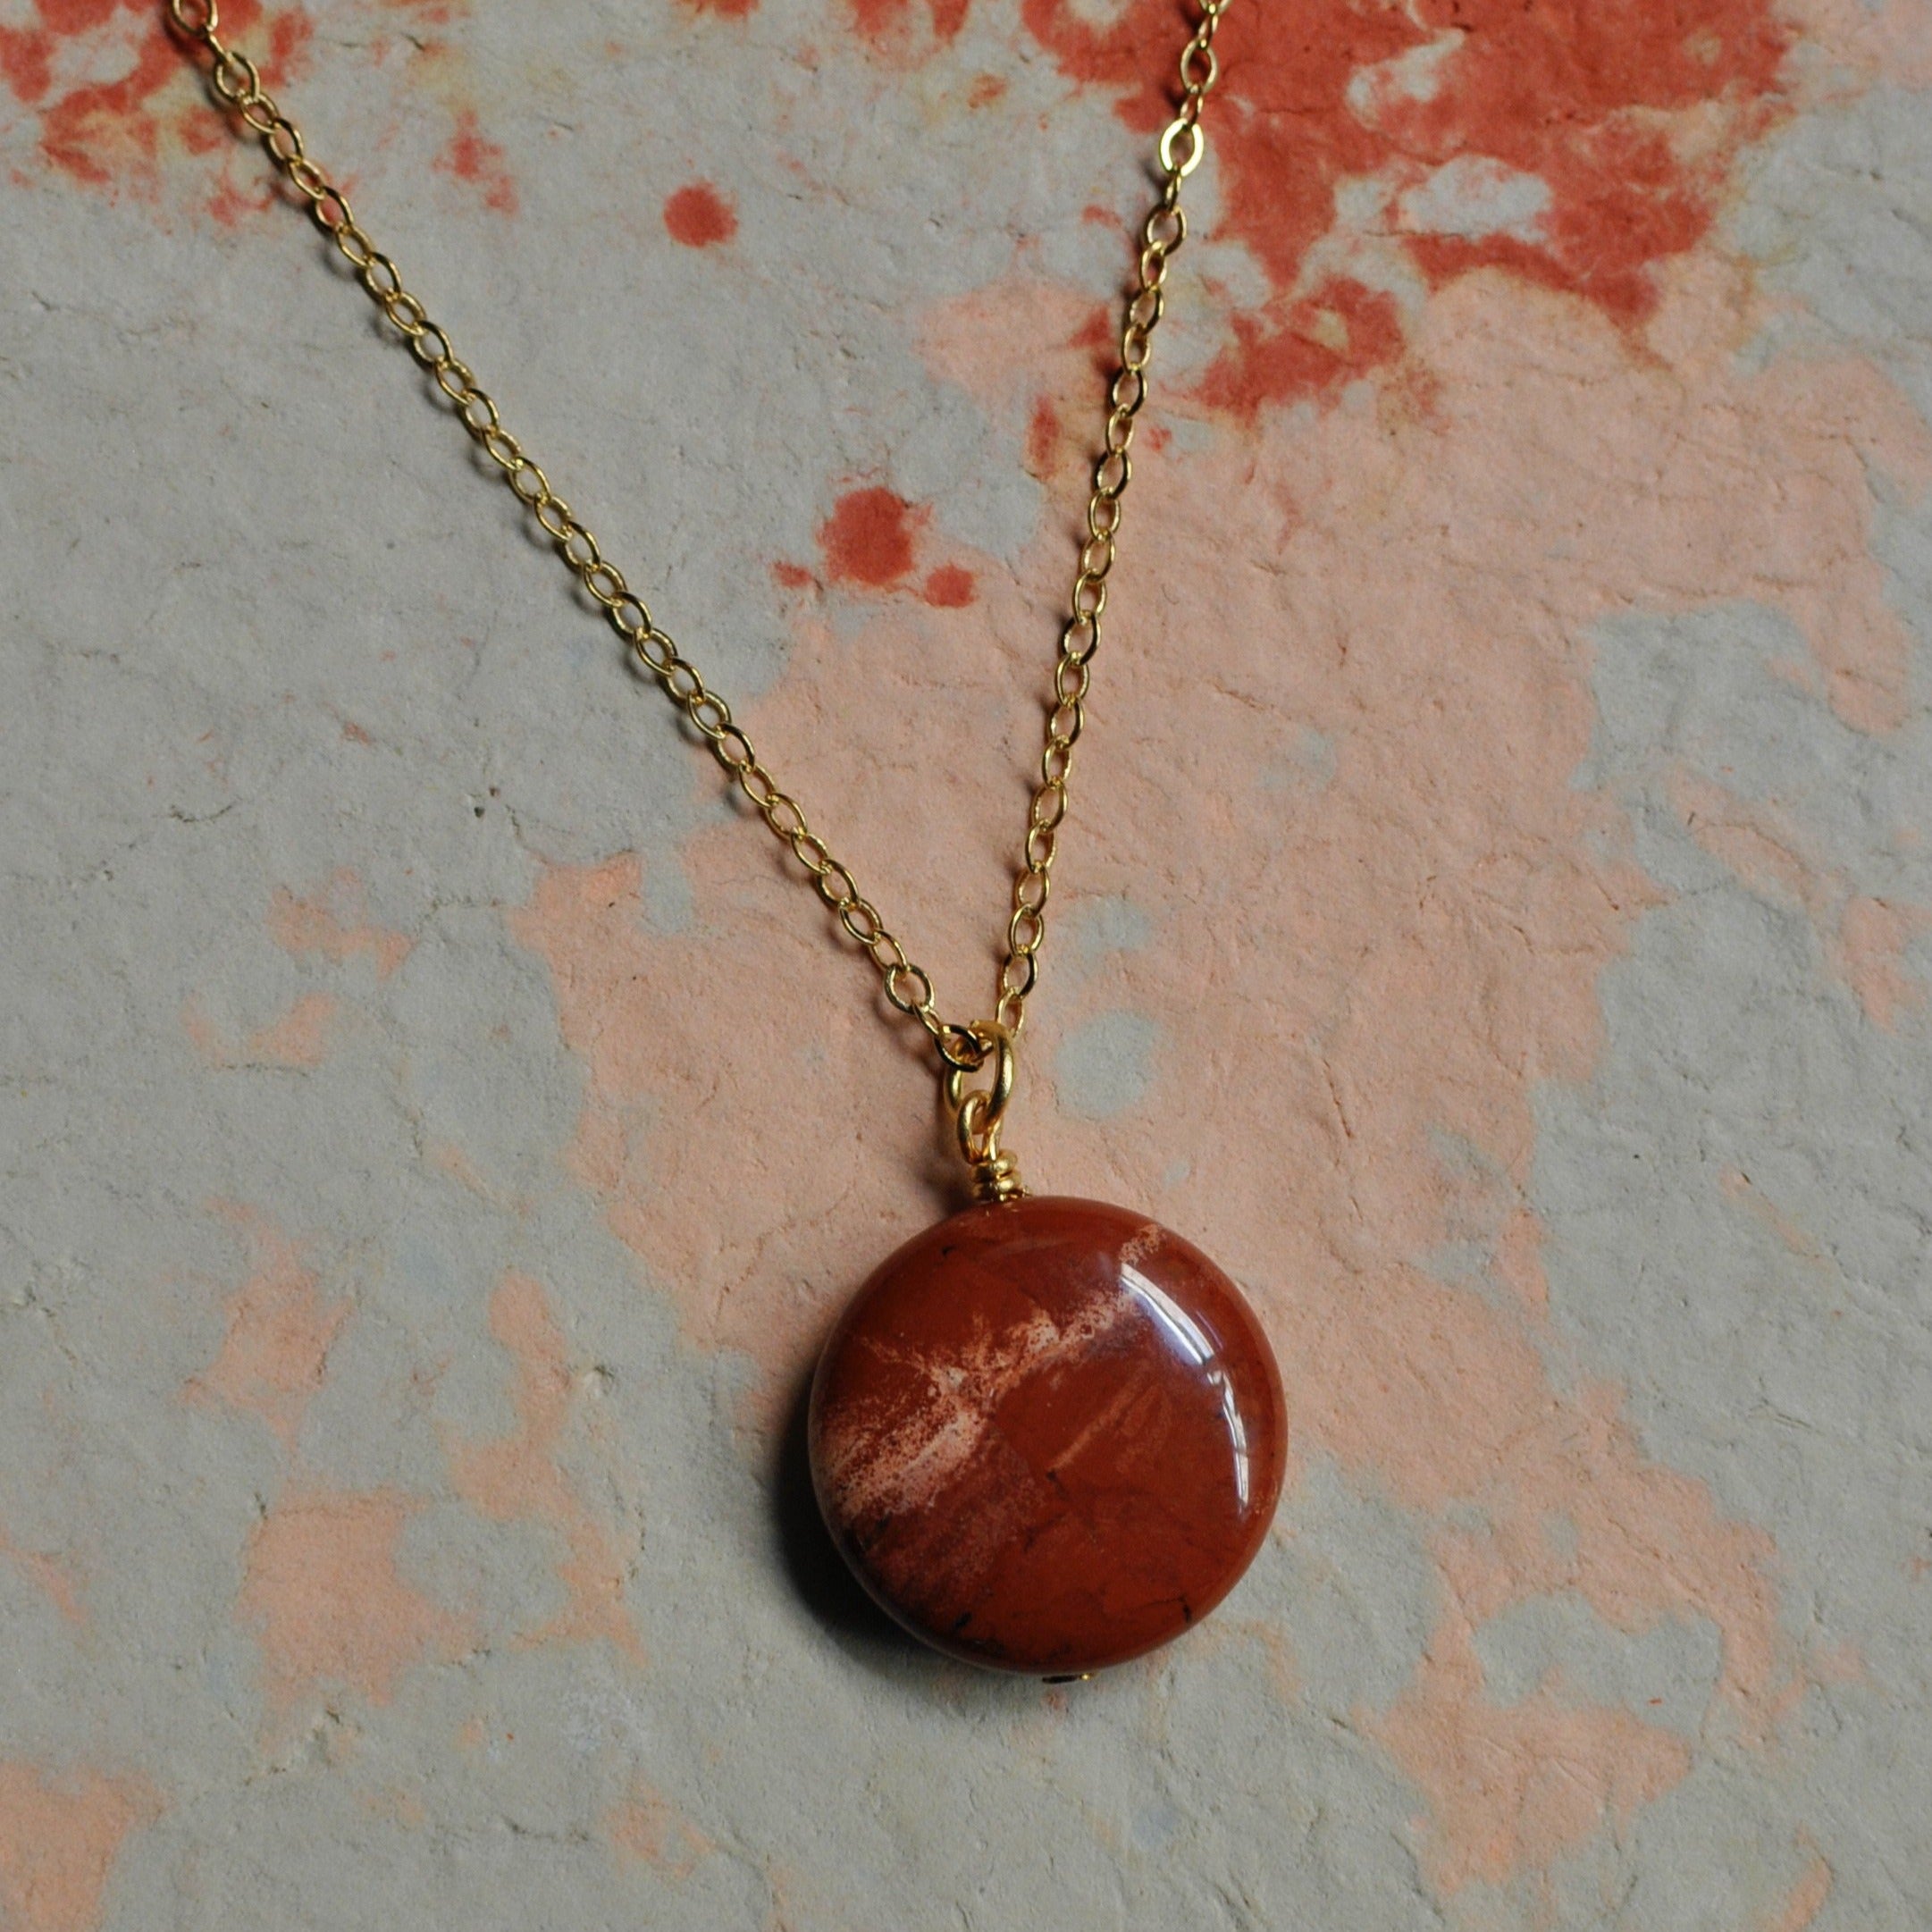 Skipping Stones Necklace